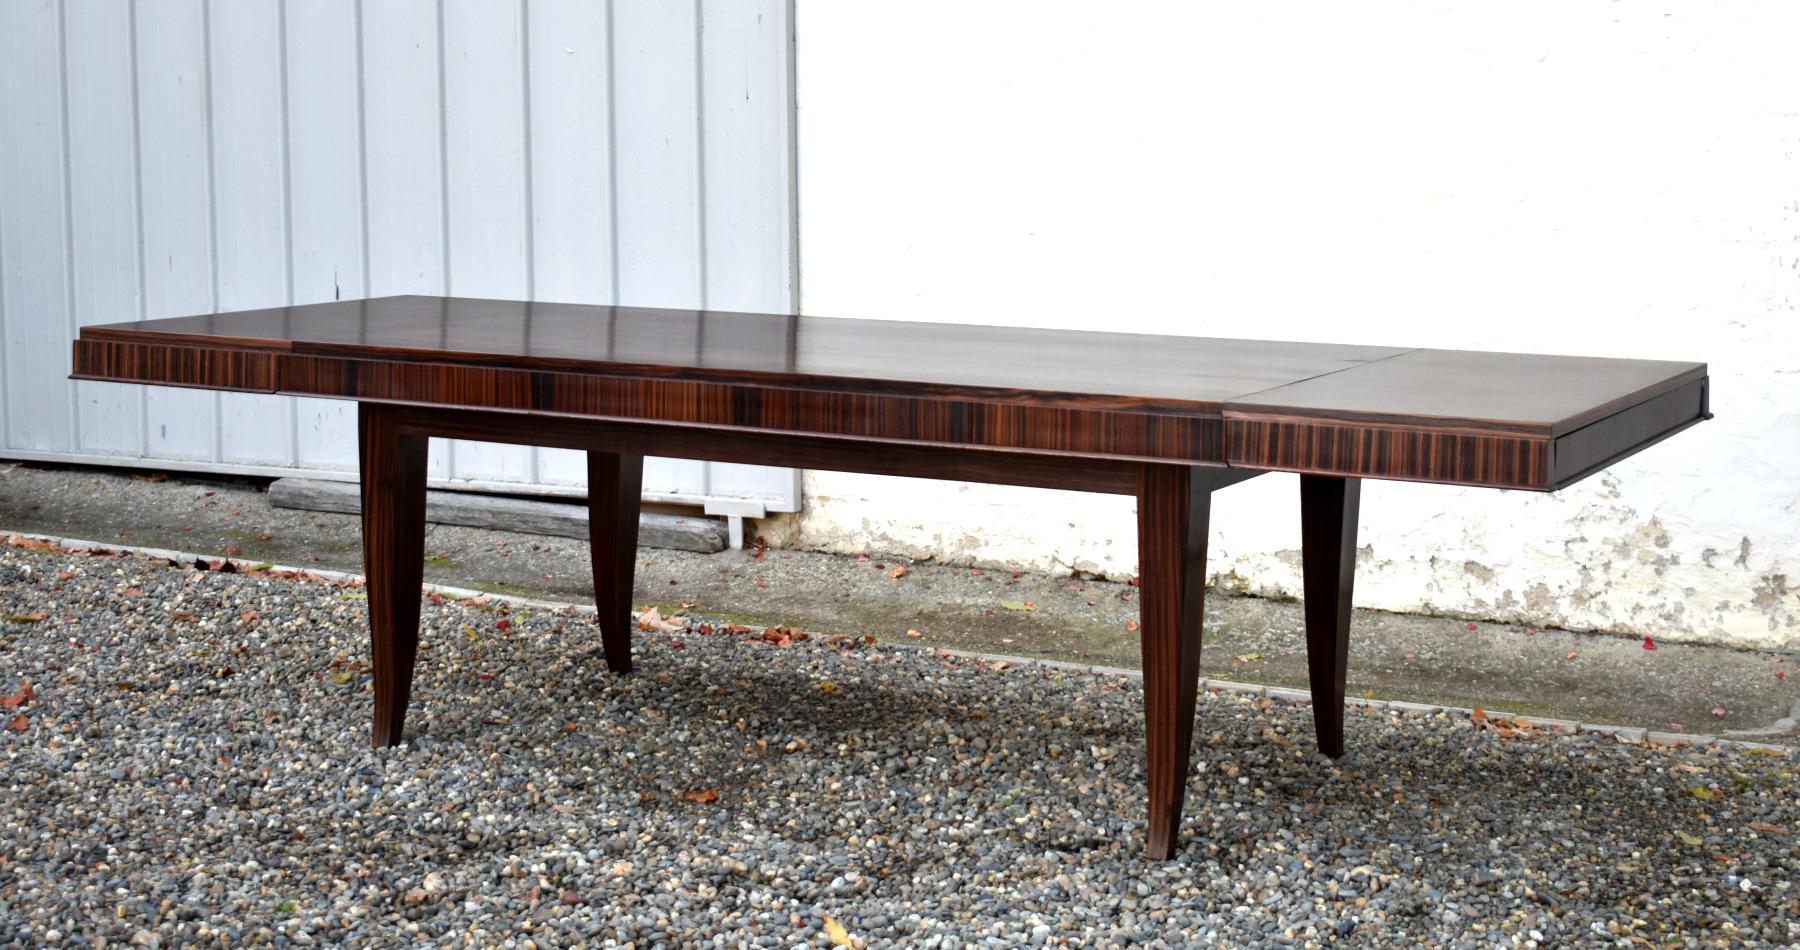 Impressive French Macassar Ebony Dining Table Art Deco Style 

This large impressive extendable dining table in macassar ebony opens out with the addition of two drop-in leaves, enabling comfortable seating for up to 12 people. 

The table is of